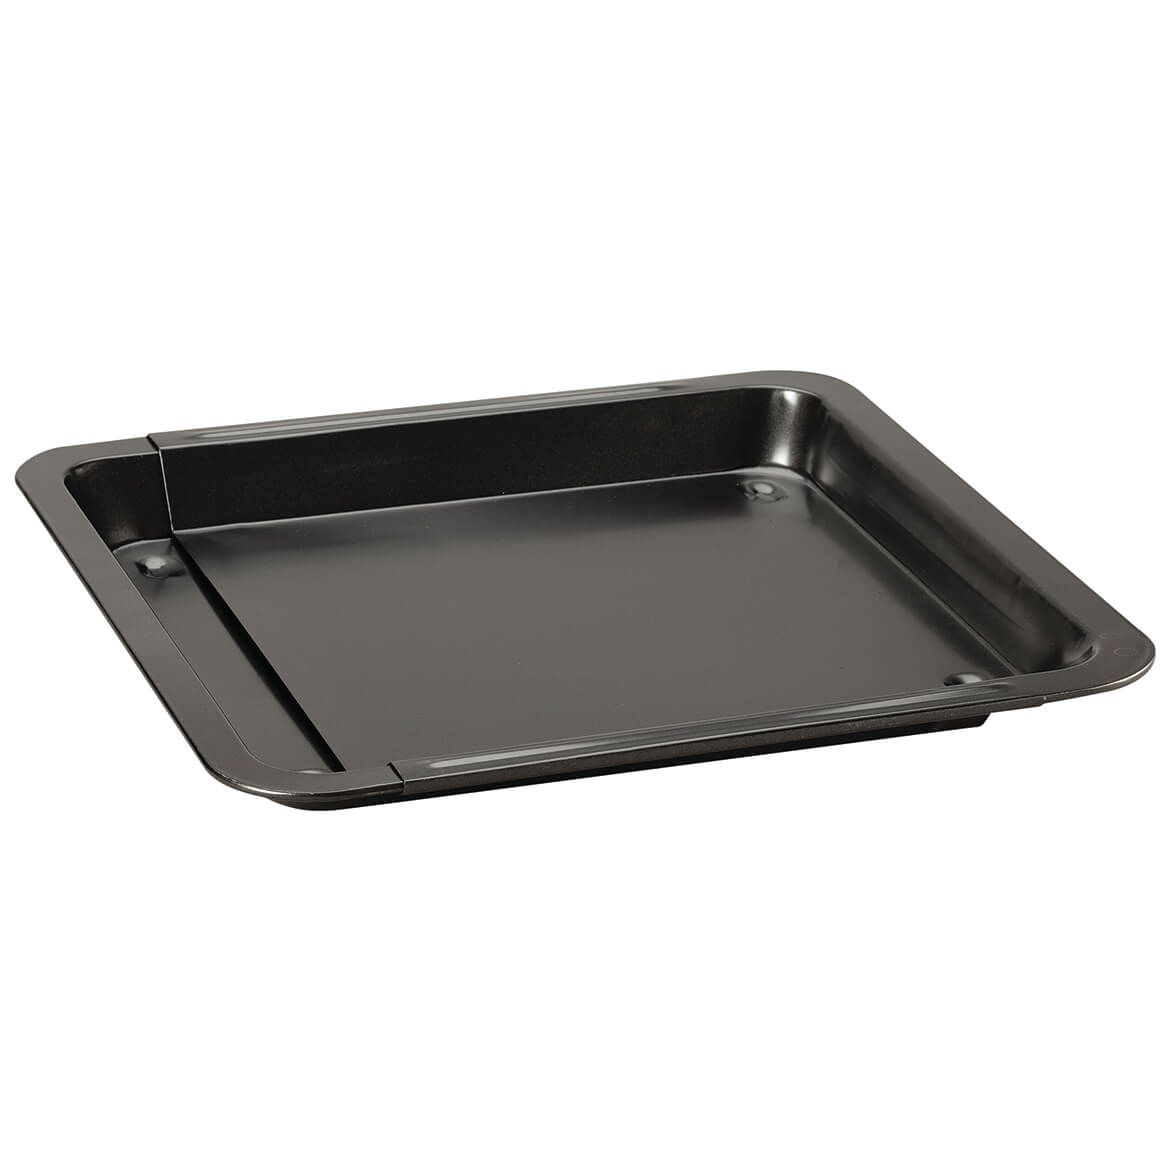 Extendable Baking Tray by Chef's Pride™ + '-' + 374908